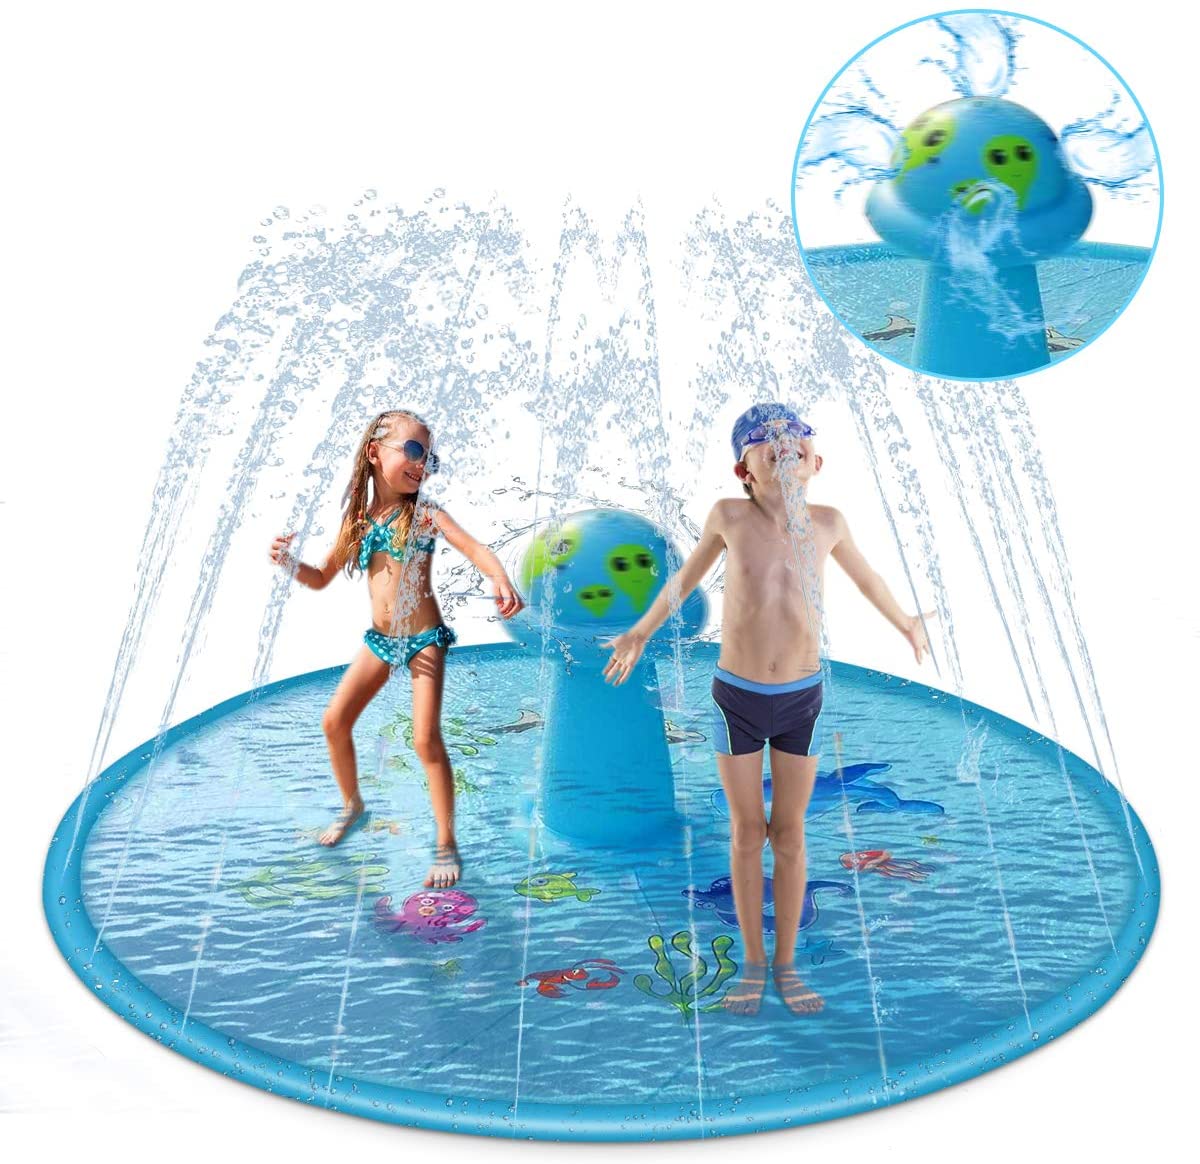 37.7 Sprinkler Play Mat Water Play Pad Upgraded Summer Outdoor Water Toys Wading Pool for Toddlers Dog Pool with Sprinkler Learning Educational Wading Pool for Dogs Kids Inflatable Fun Backyard Fountain Play Mat QYCX Splash Pad 